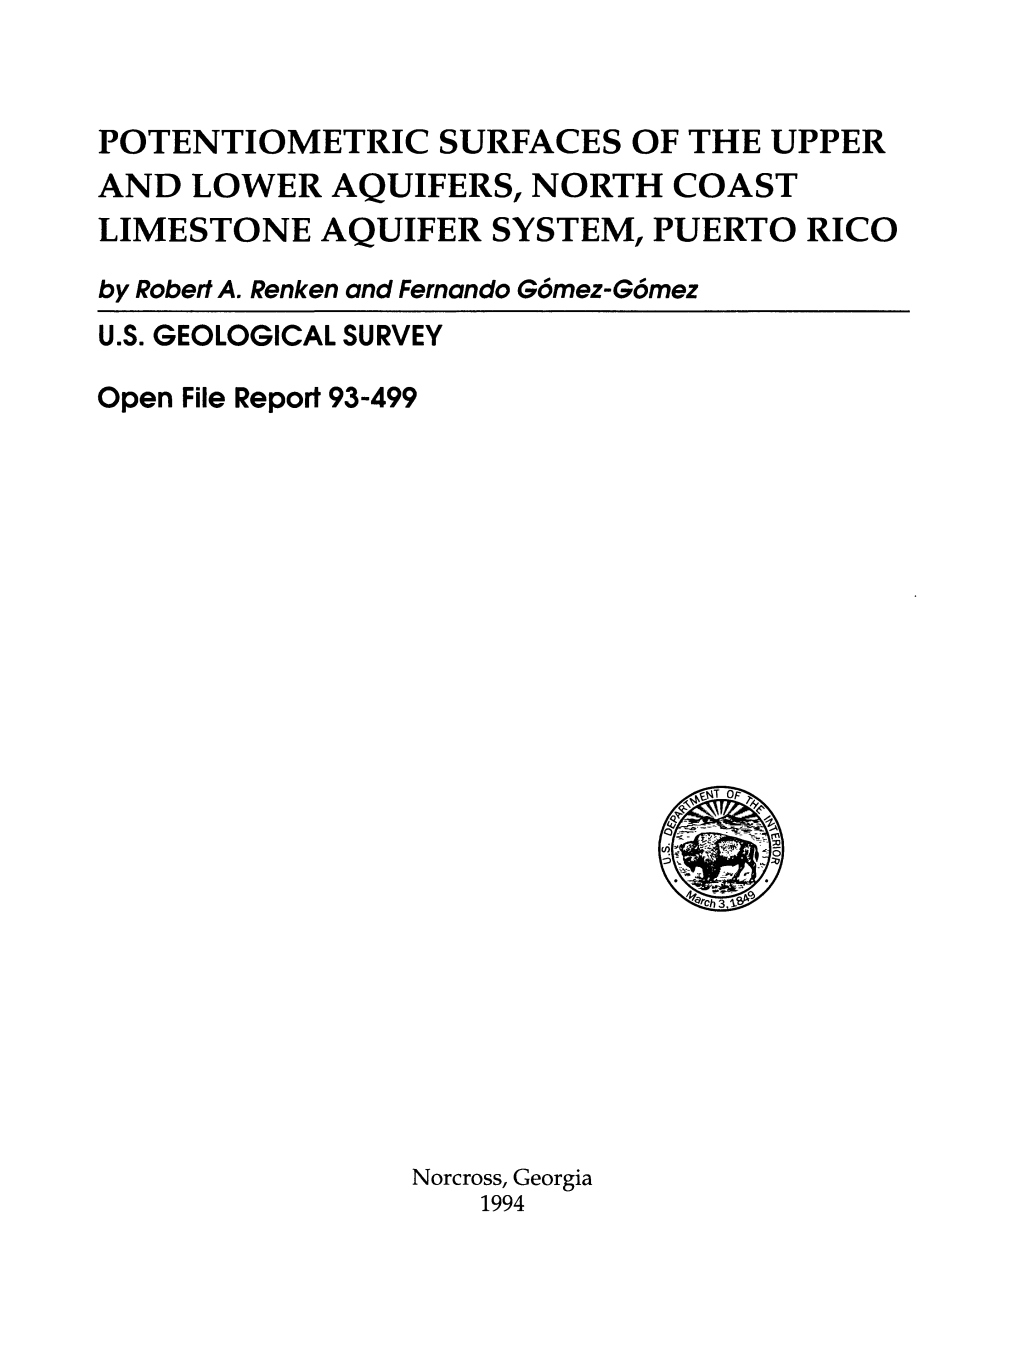 POTENTIOMETRIC SURFACES of the UPPER and LOWER AQUIFERS, NORTH COAST LIMESTONE AQUIFER SYSTEM, PUERTO RICO by Robert A